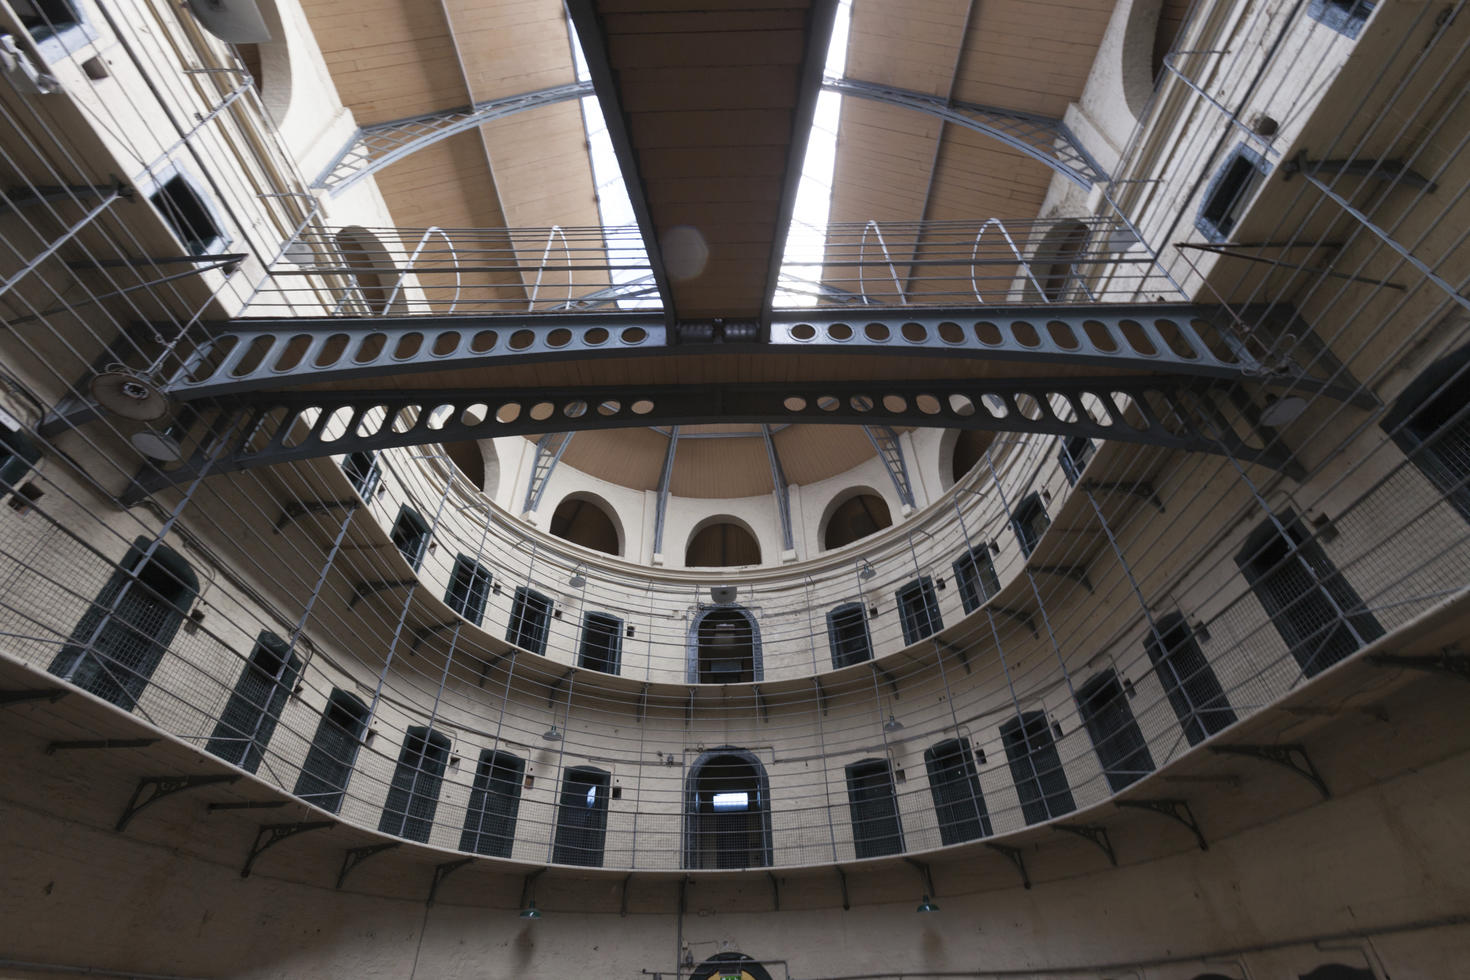 Inside view of a prison